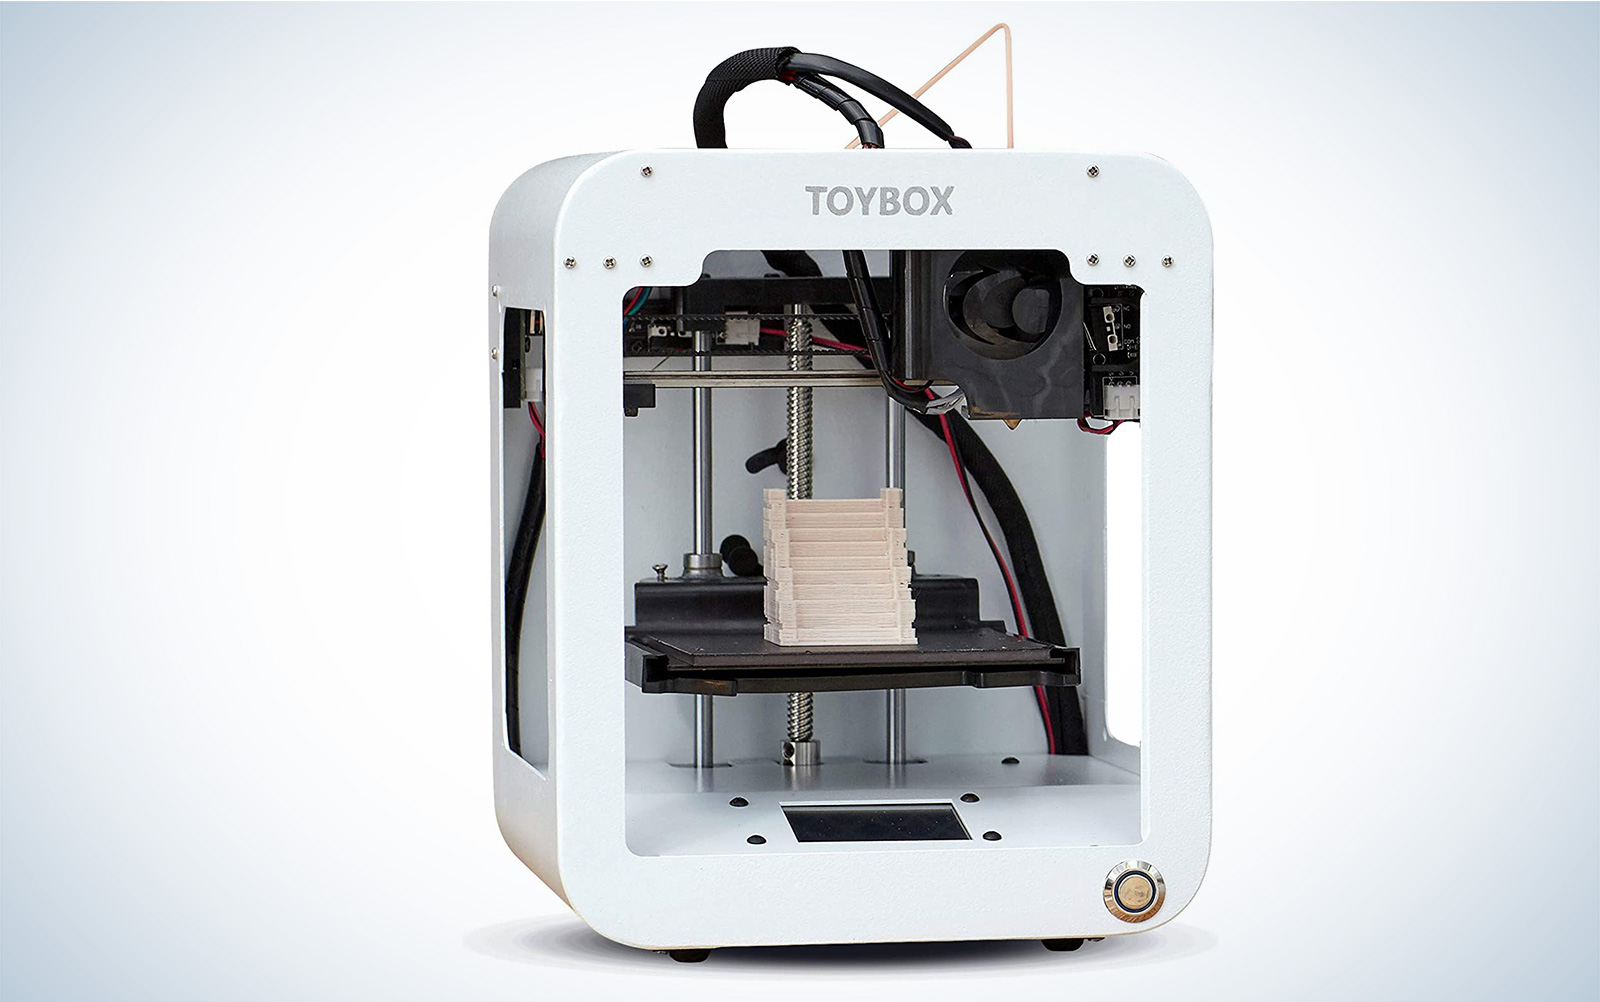 Toybox 3D Printer bundle is now only $329.97